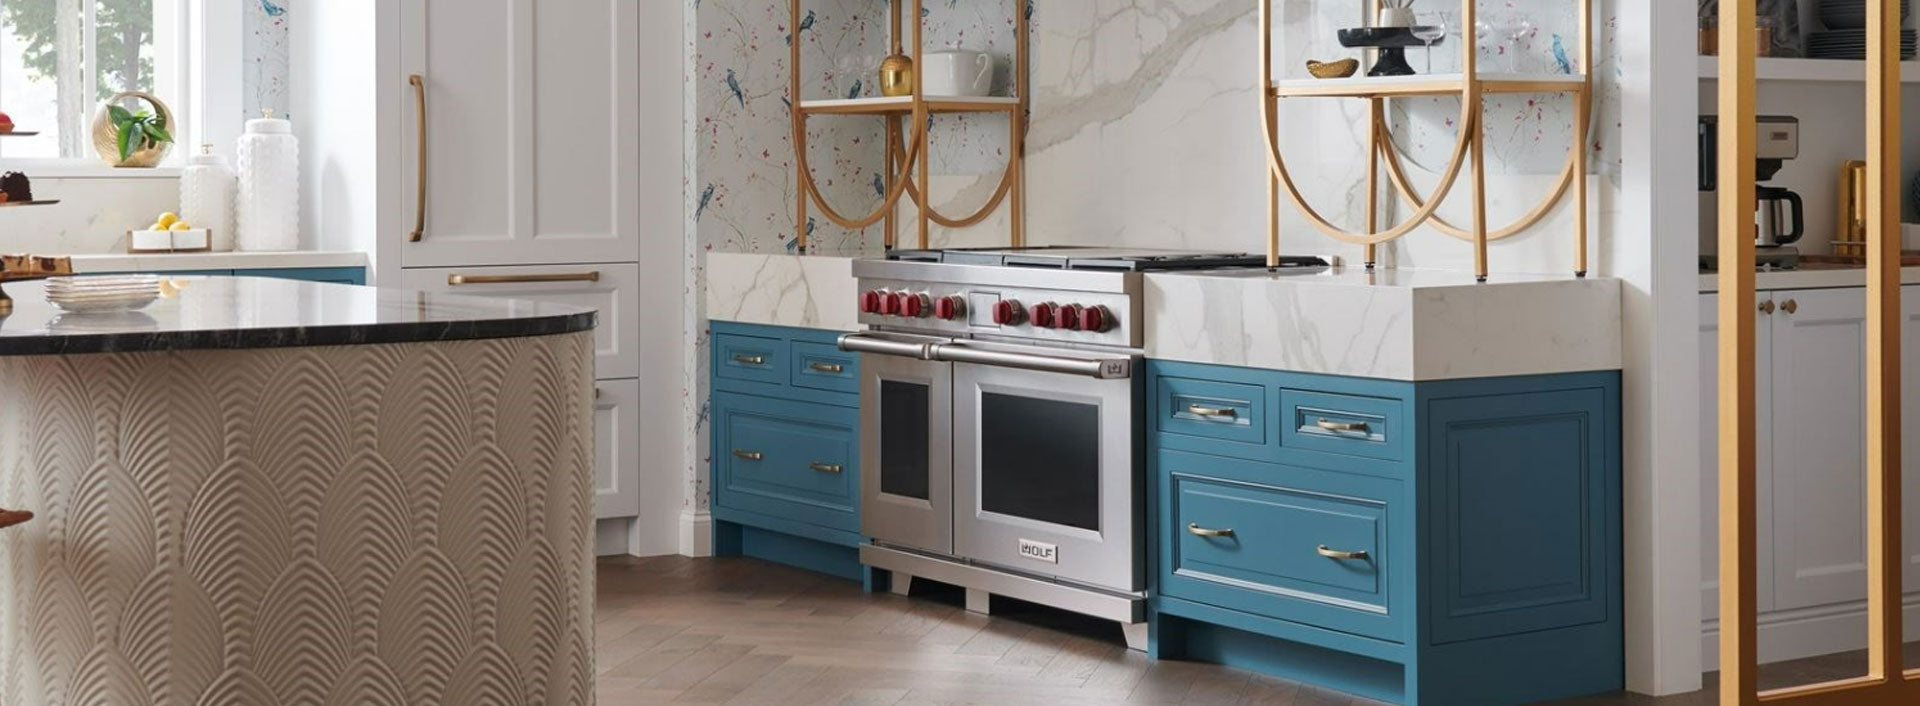 Wolf Kitchen Appliances and Accessories available at Reece Bath & Kitchen